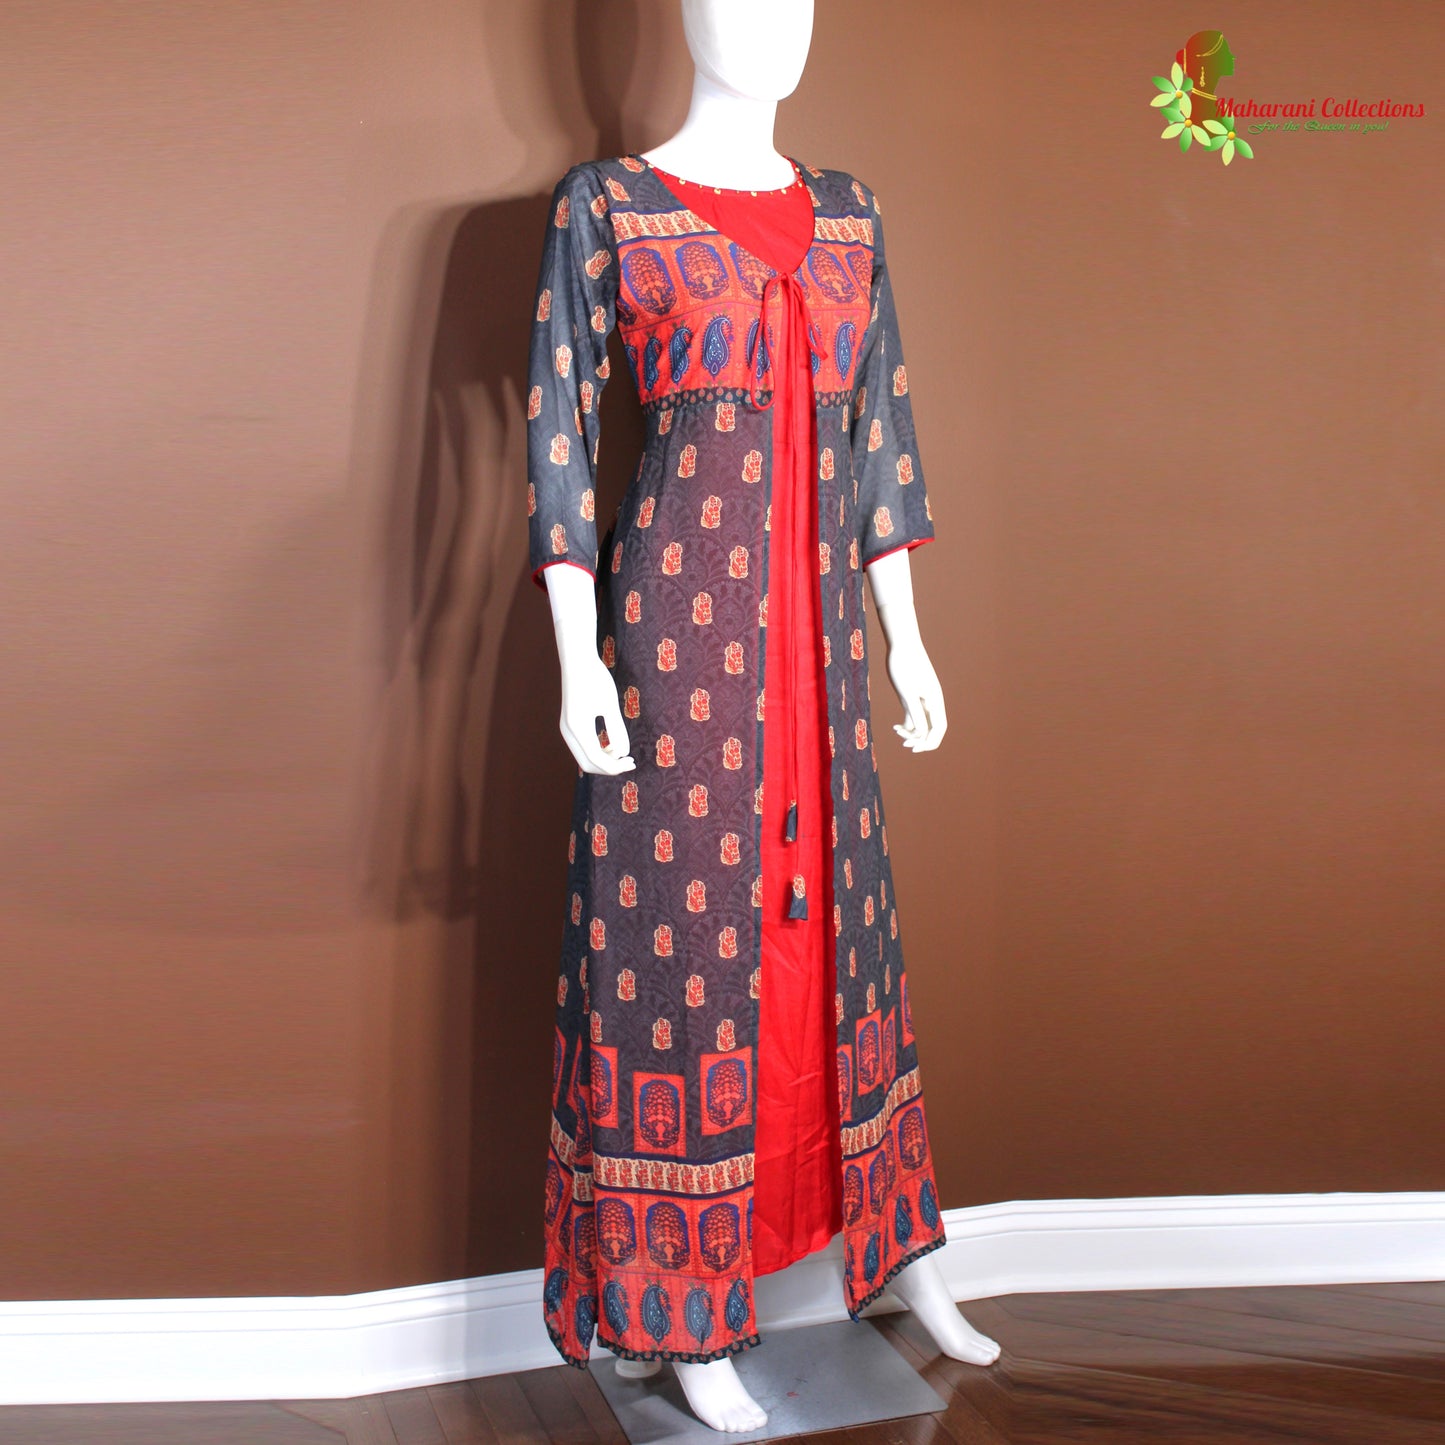 Maharani's Georgette Long Evening Dress - Brown and Red (S)